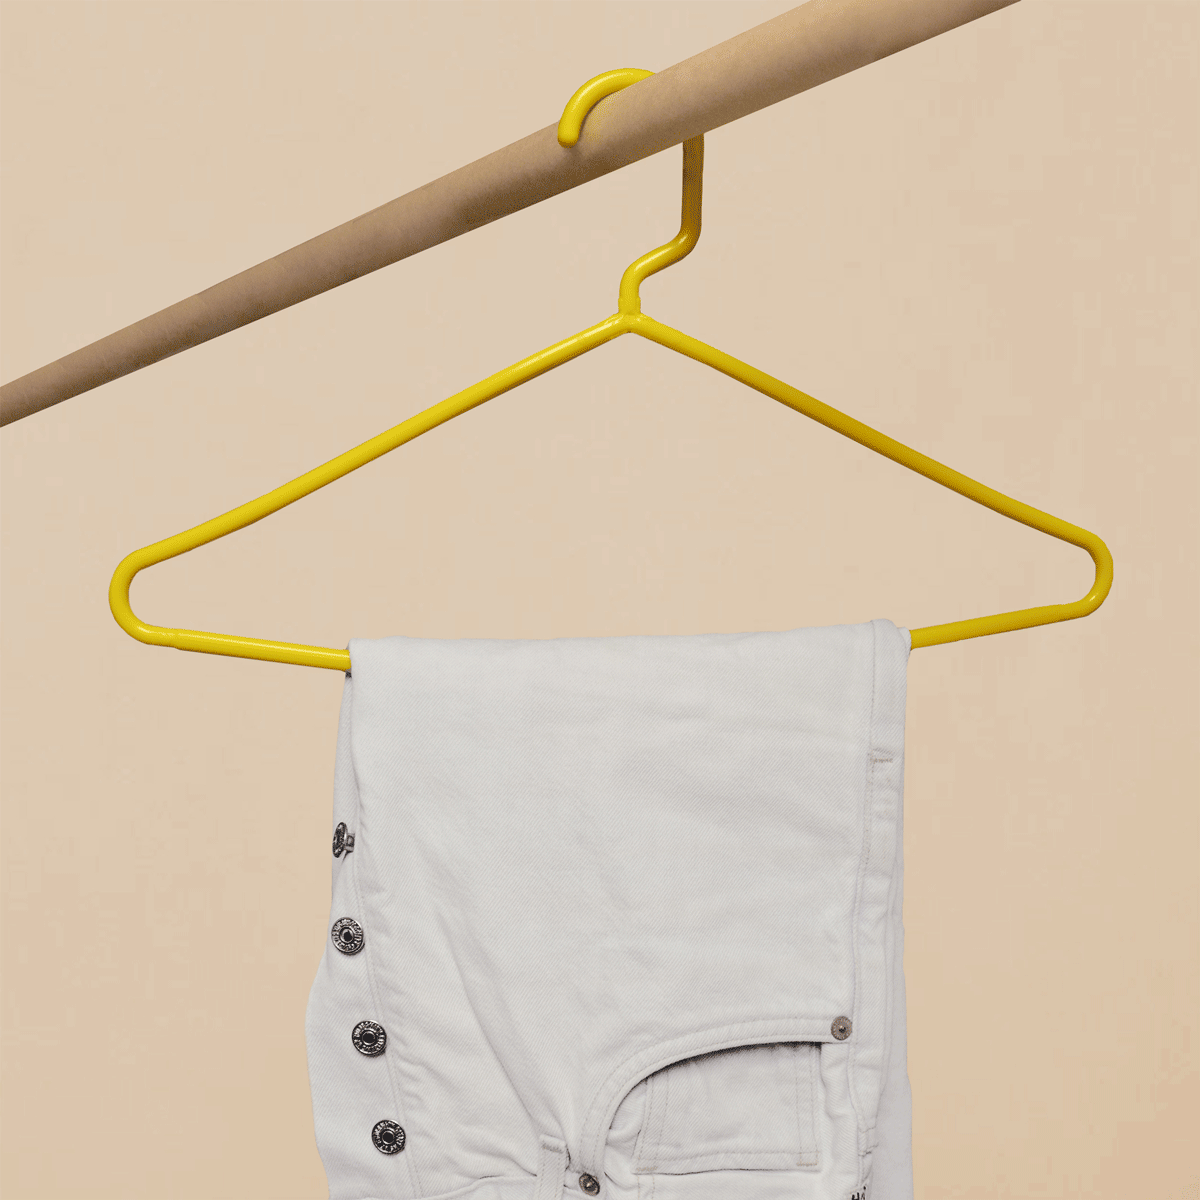 A gif of a high quality yellow hanger replacing a low quality hanger bending under the weight of jeans